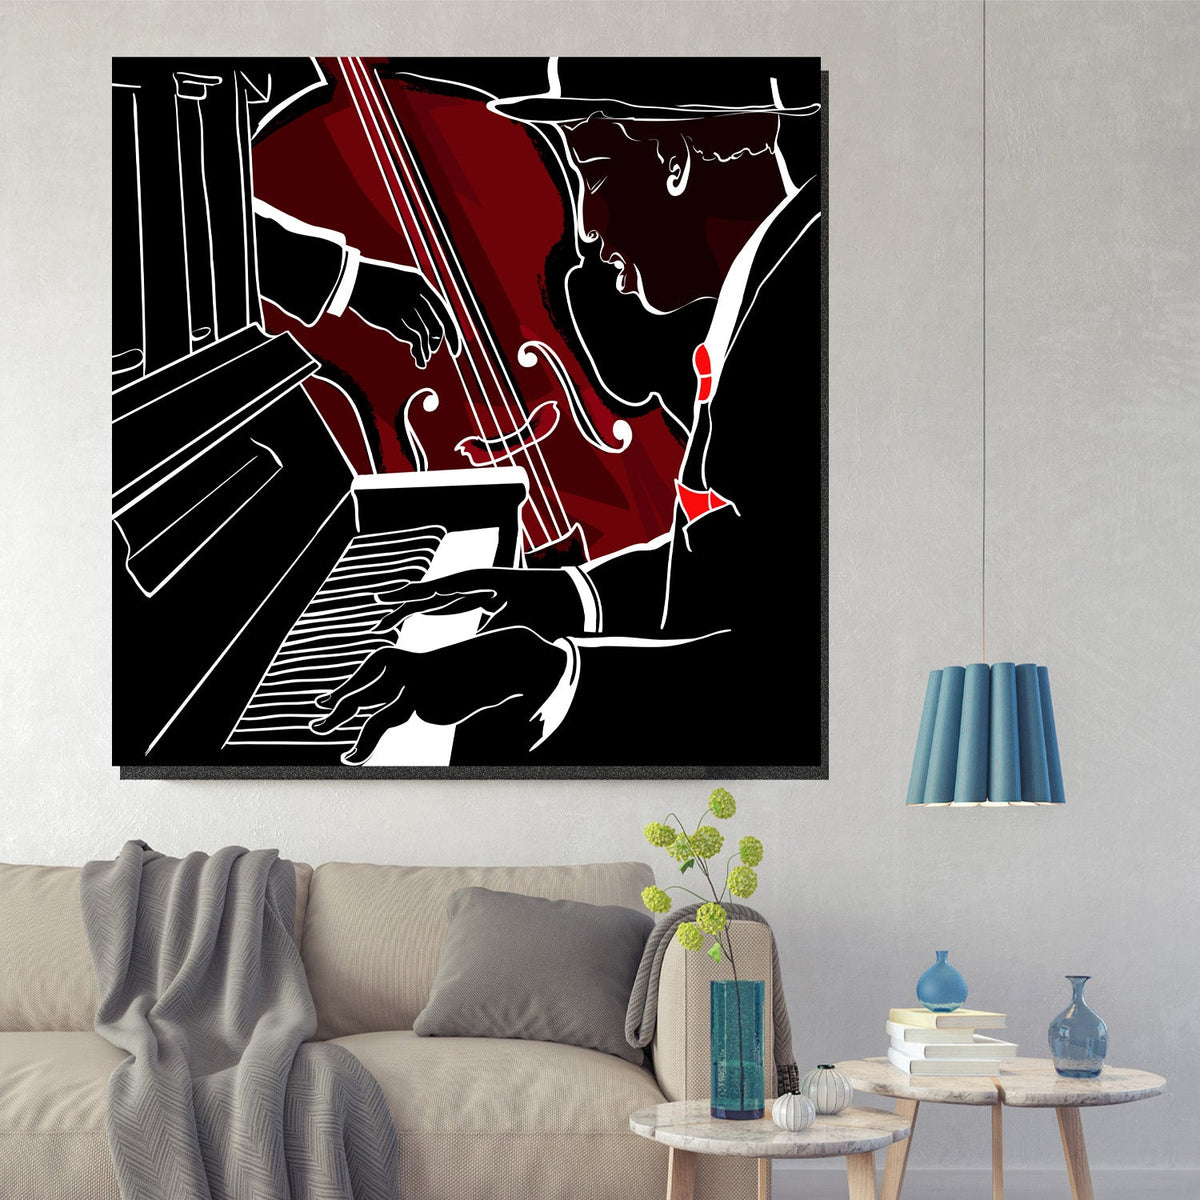 https://cdn.shopify.com/s/files/1/0387/9986/8044/products/PianoandDouble-bassCanvasArtprintStretched-1.jpg